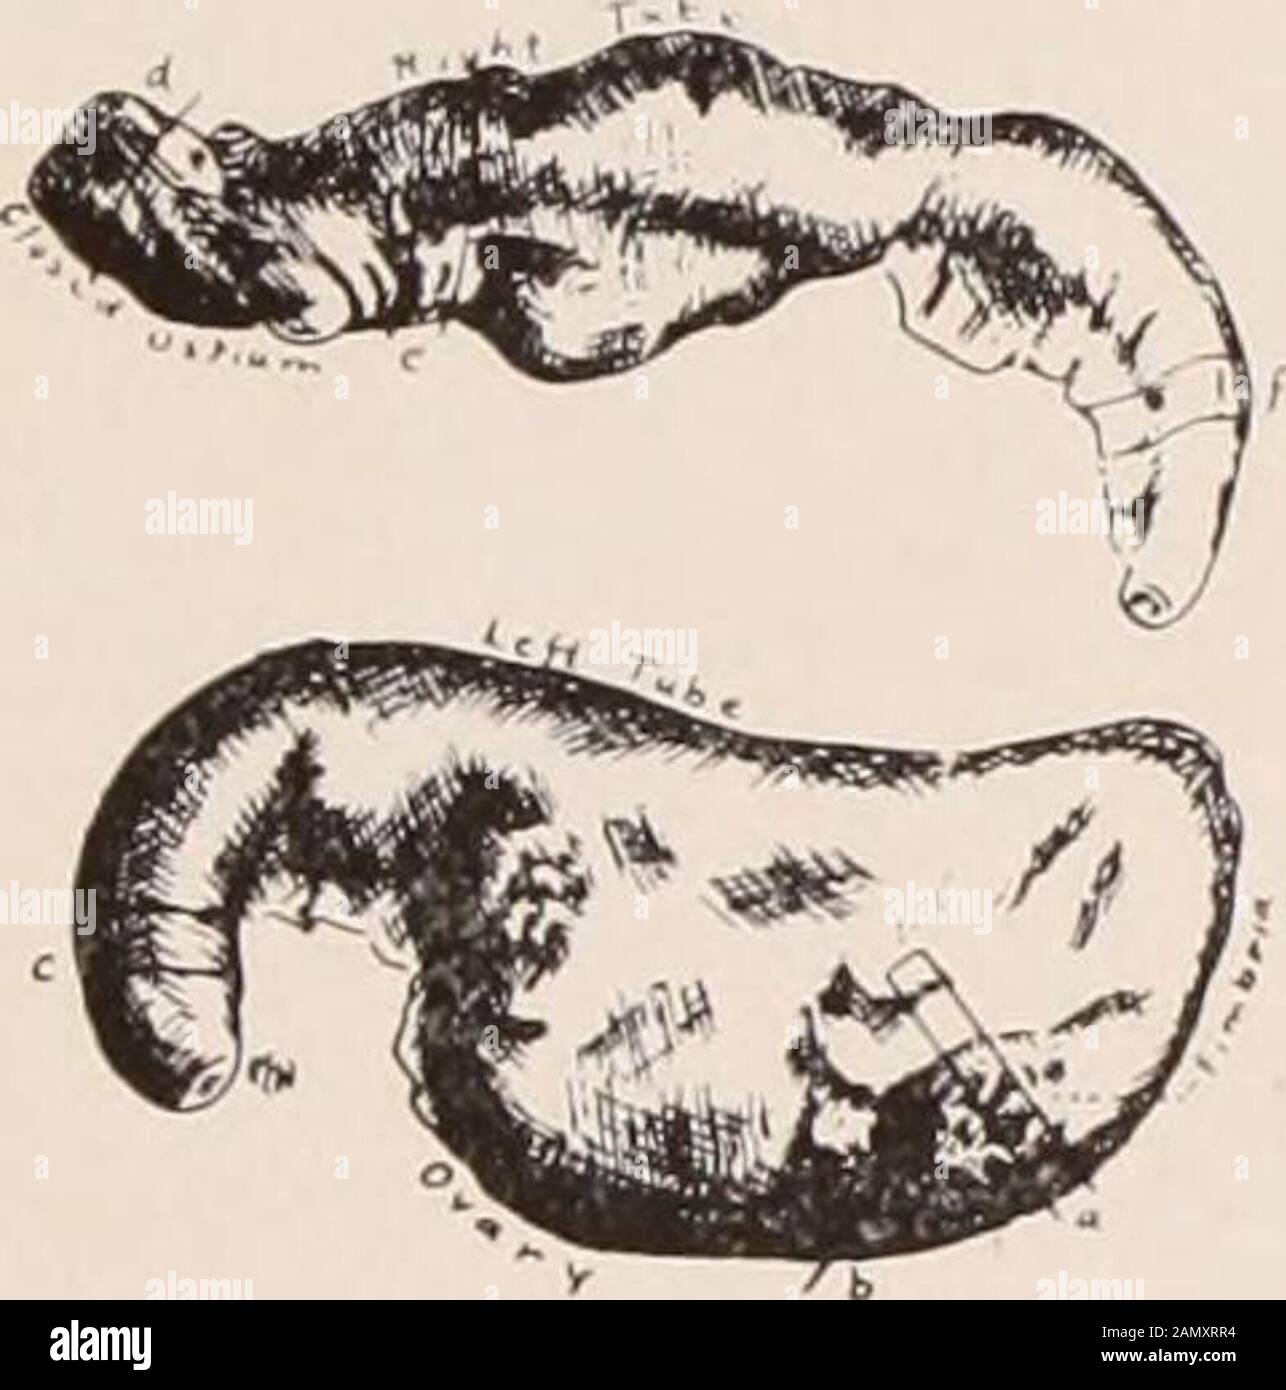 Transactions of the American Association of Obstetricians and Gynecologists for the year ... . Case XIII.Upper.—Drawing of gross specimen. Lower.—Photomicrograph of the dense pus cell infiltration of the corpus luteumshown at a in the drawing. Microscopic Examination.—Section (a) shows a typical corpusluteum of pregnancy with an extensive infection. The infection isin multiple foci, eight being counted in this section. In each thereare typical pus cell debris and hemolyzed red blood cells. Section (b) shows a wall with extensive connective tissue hyper-plasia. The mucosa exhibits two types of Stock Photo